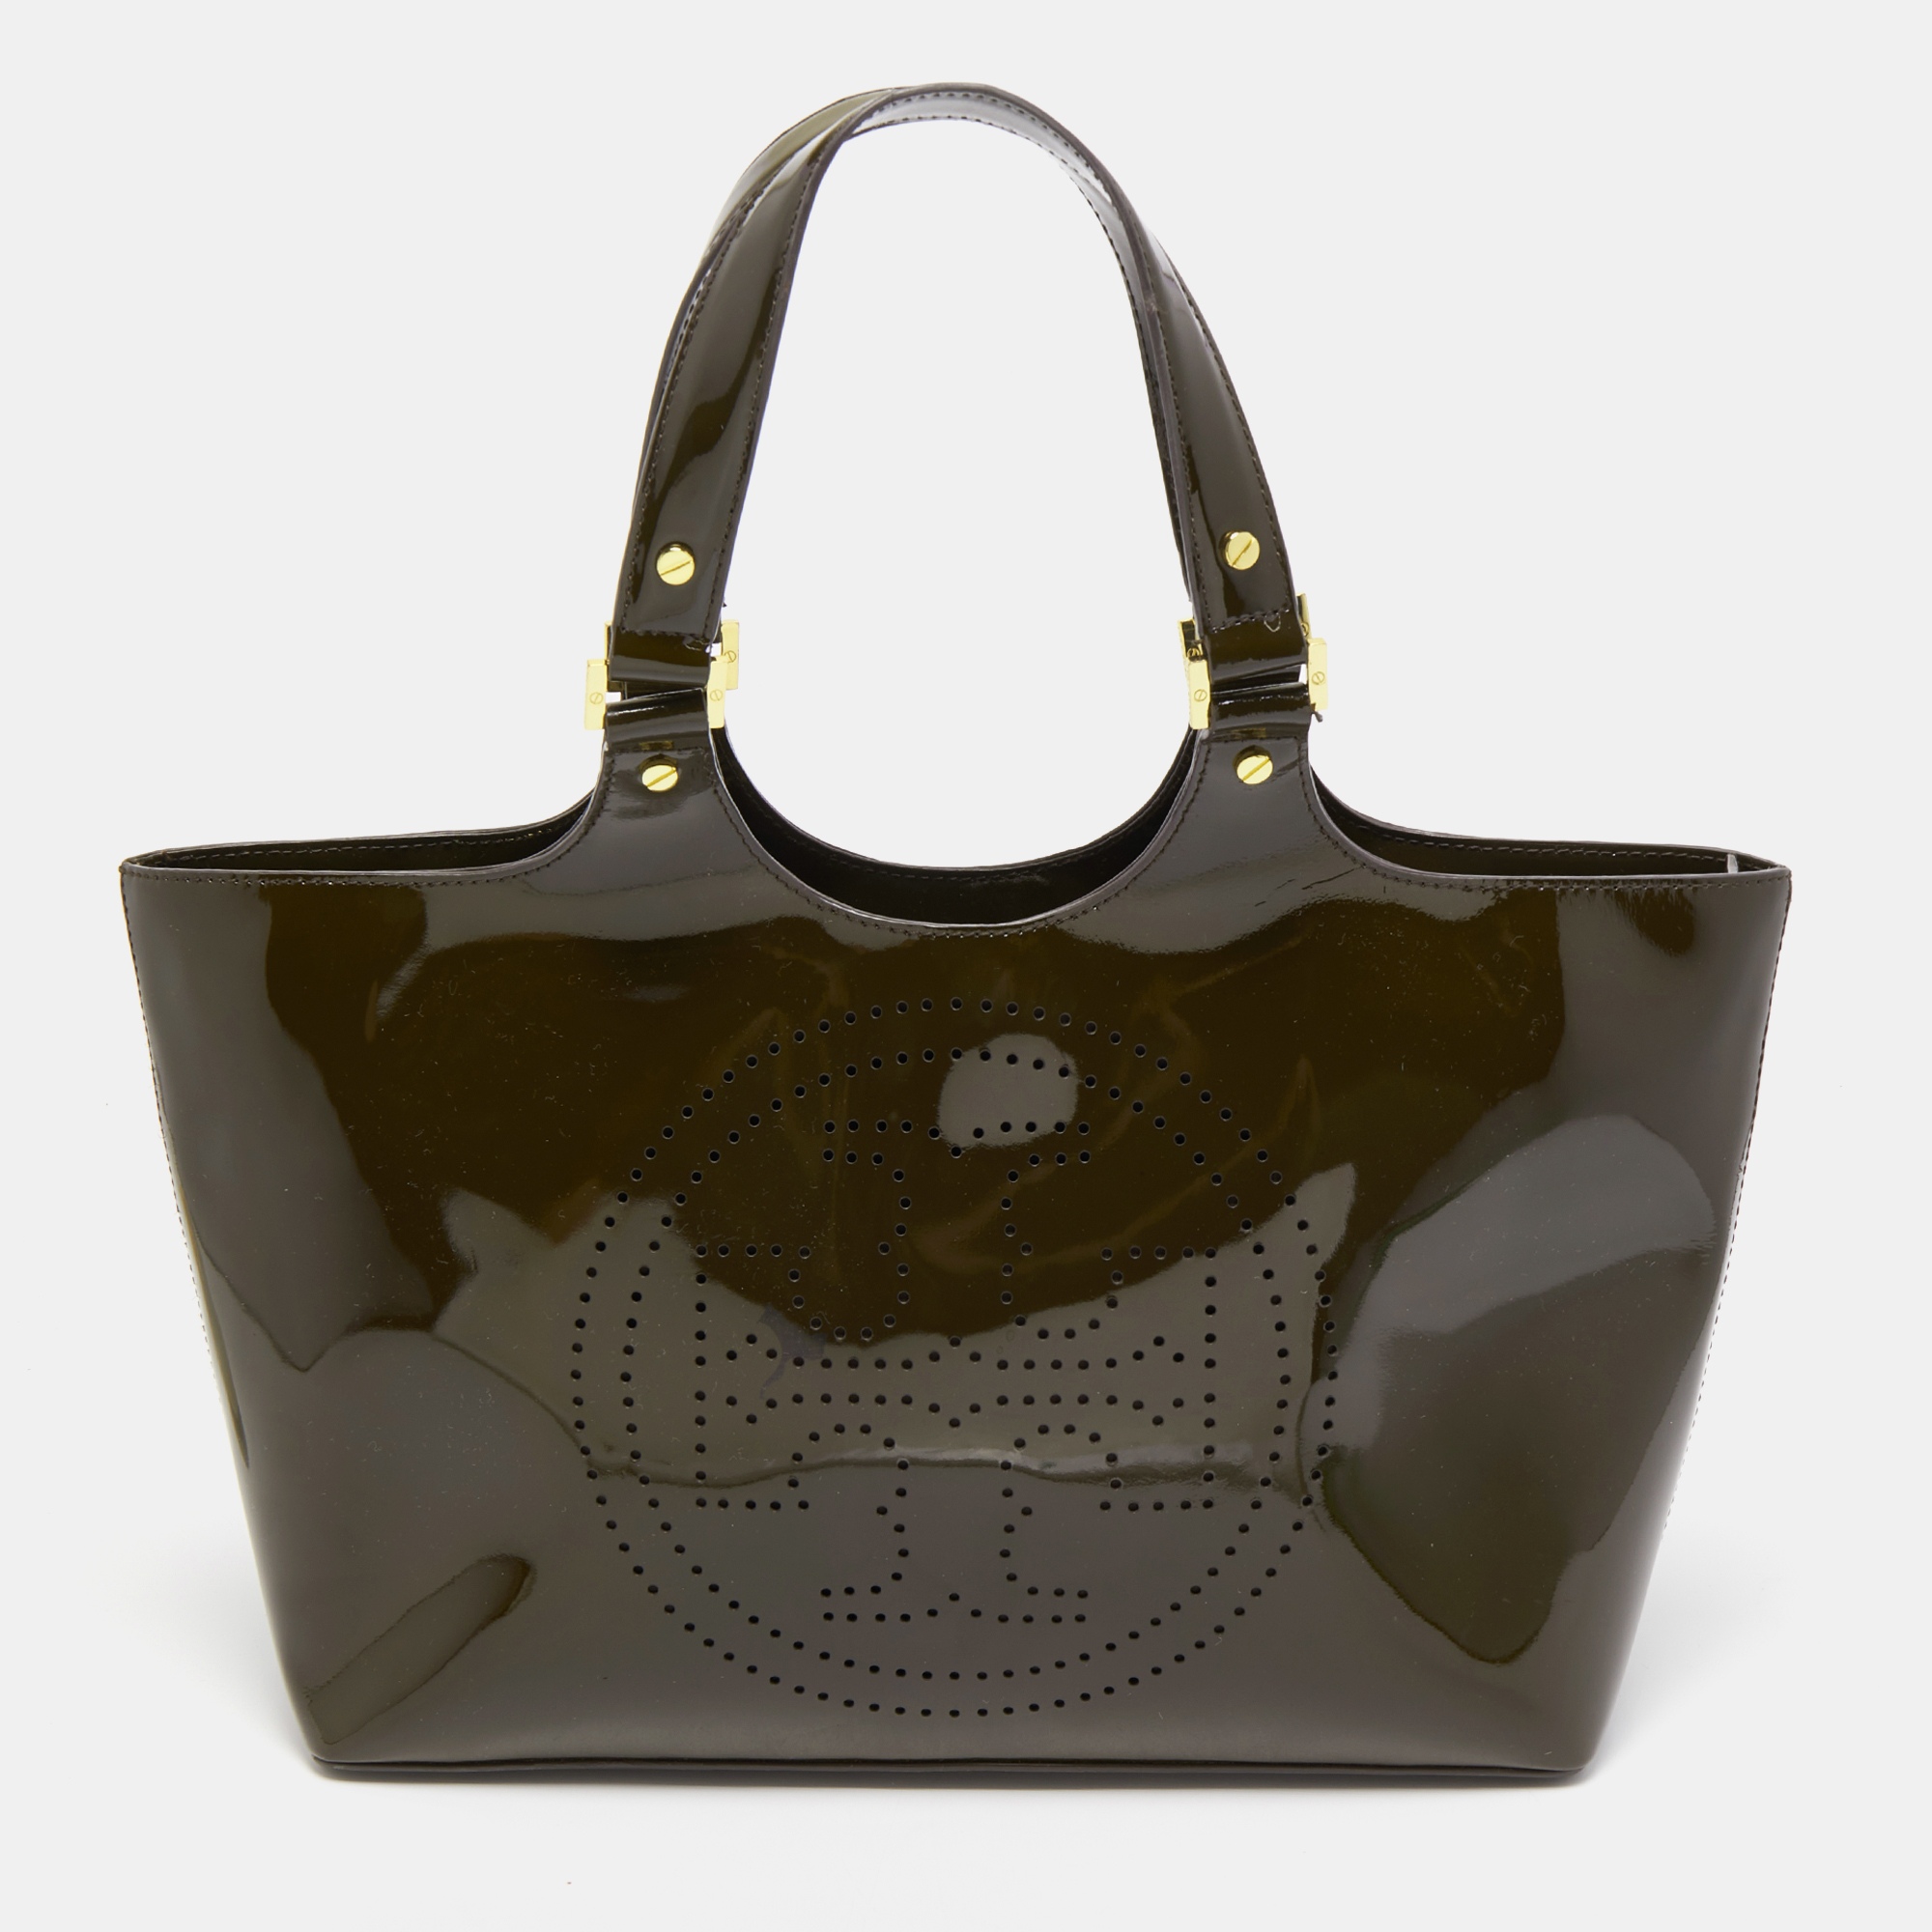 Tory Burch Dark Olive Green Patent Leather Perforated Tote Tory Burch | TLC